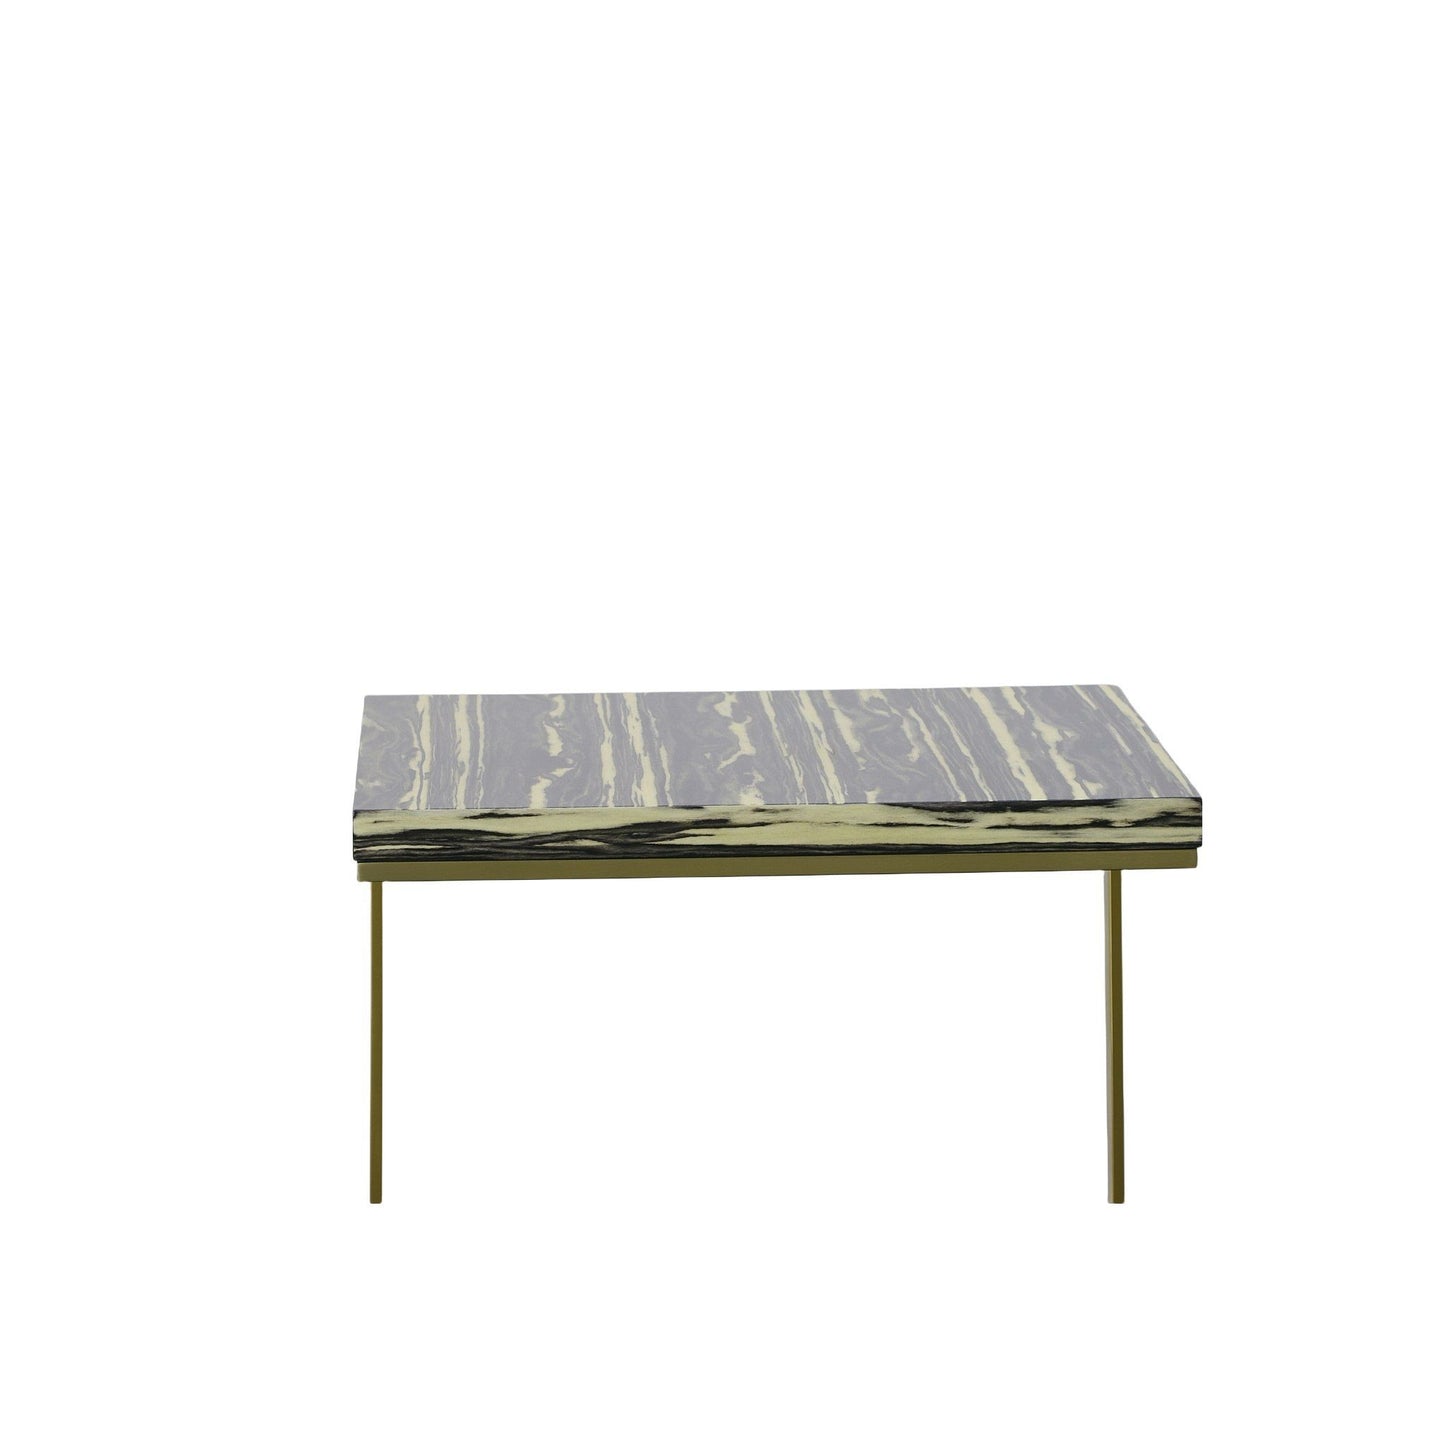 Modrest Greely - Glam Black and Gold Marble End Table